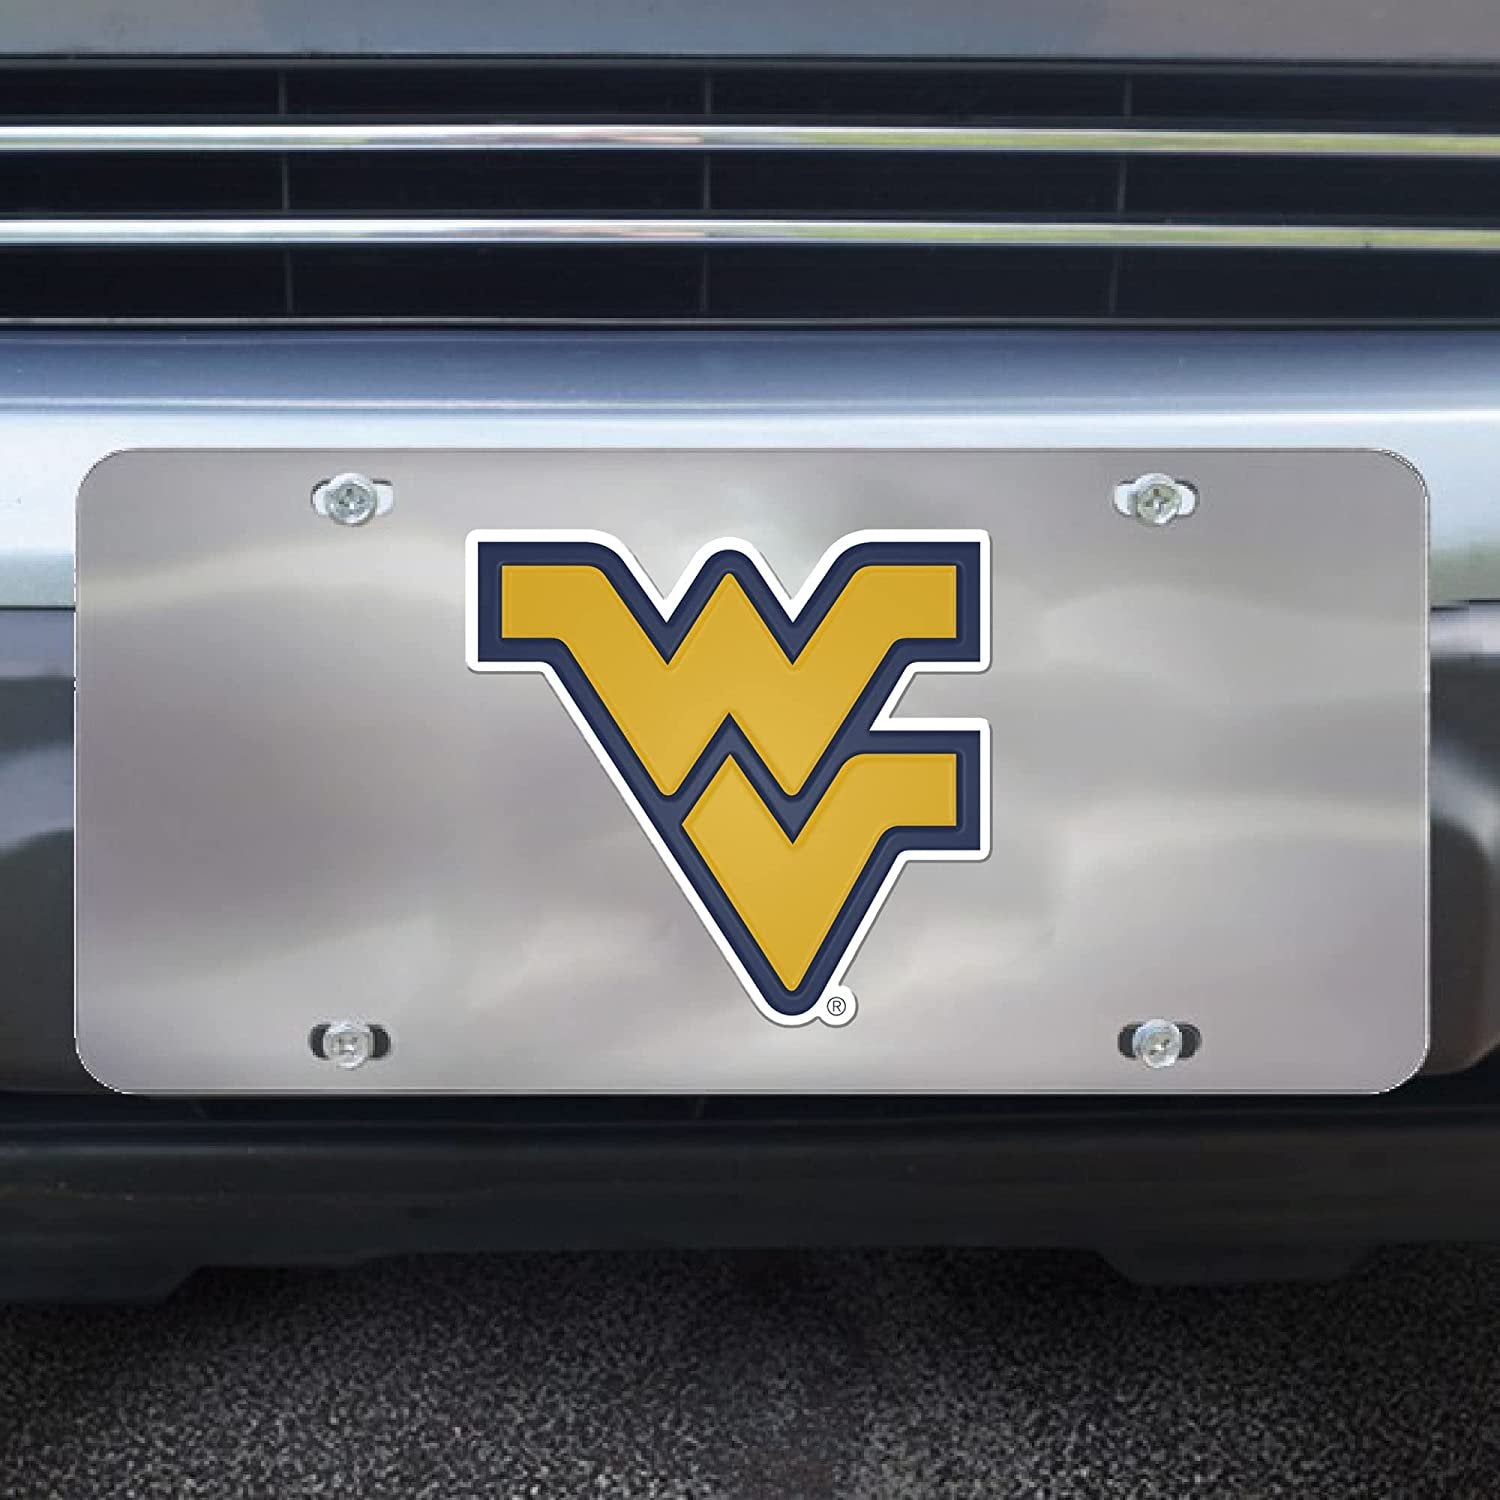 West Virginia University Mountaineers License Plate Tag, Premium Stainless Steel Diecast, Chrome, Raised Solid Metal Color Emblem, 6x12 Inch